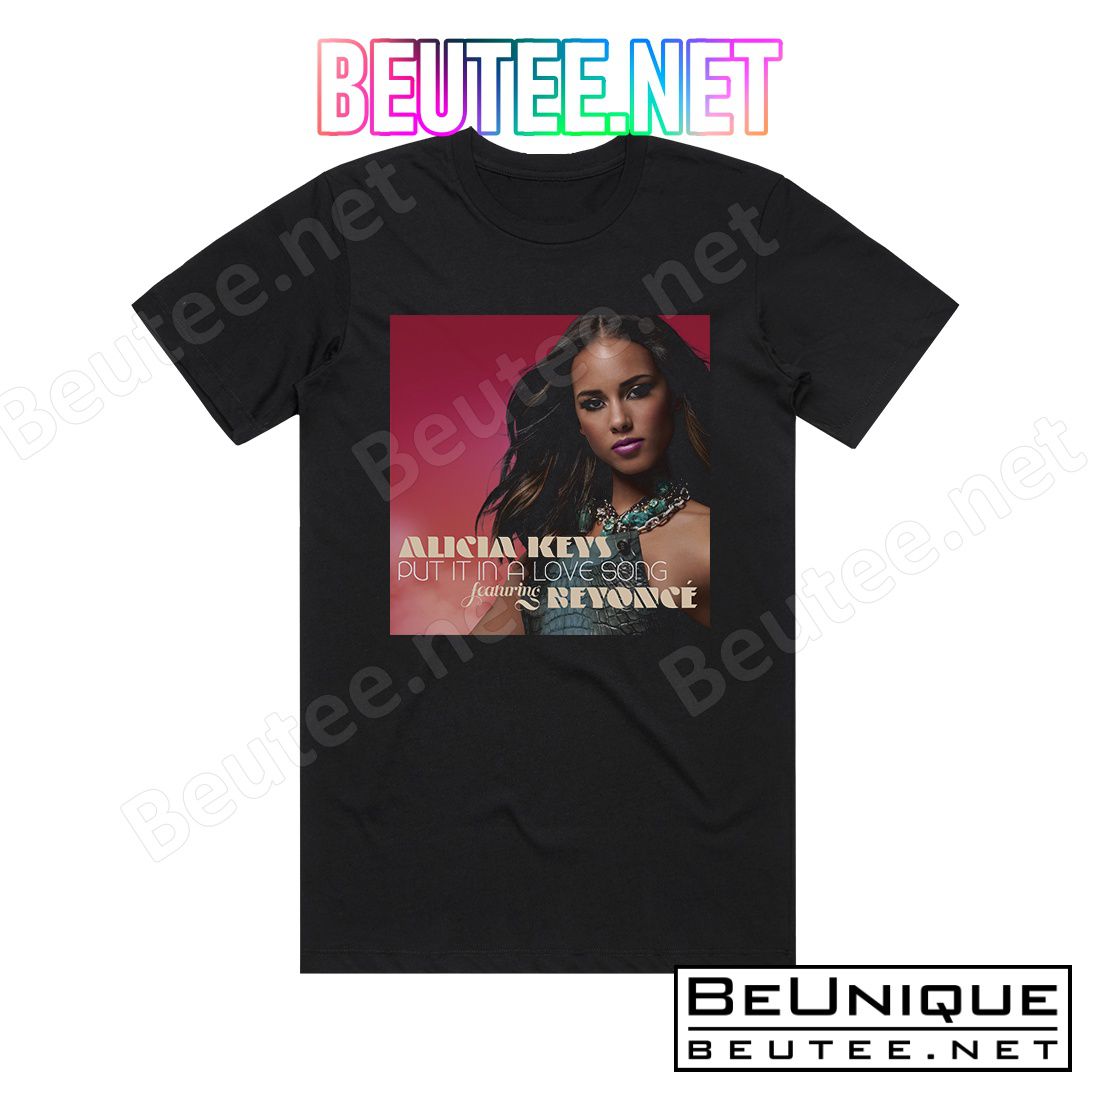 Alicia Keys Put It In A Love Song Album Cover T-Shirt